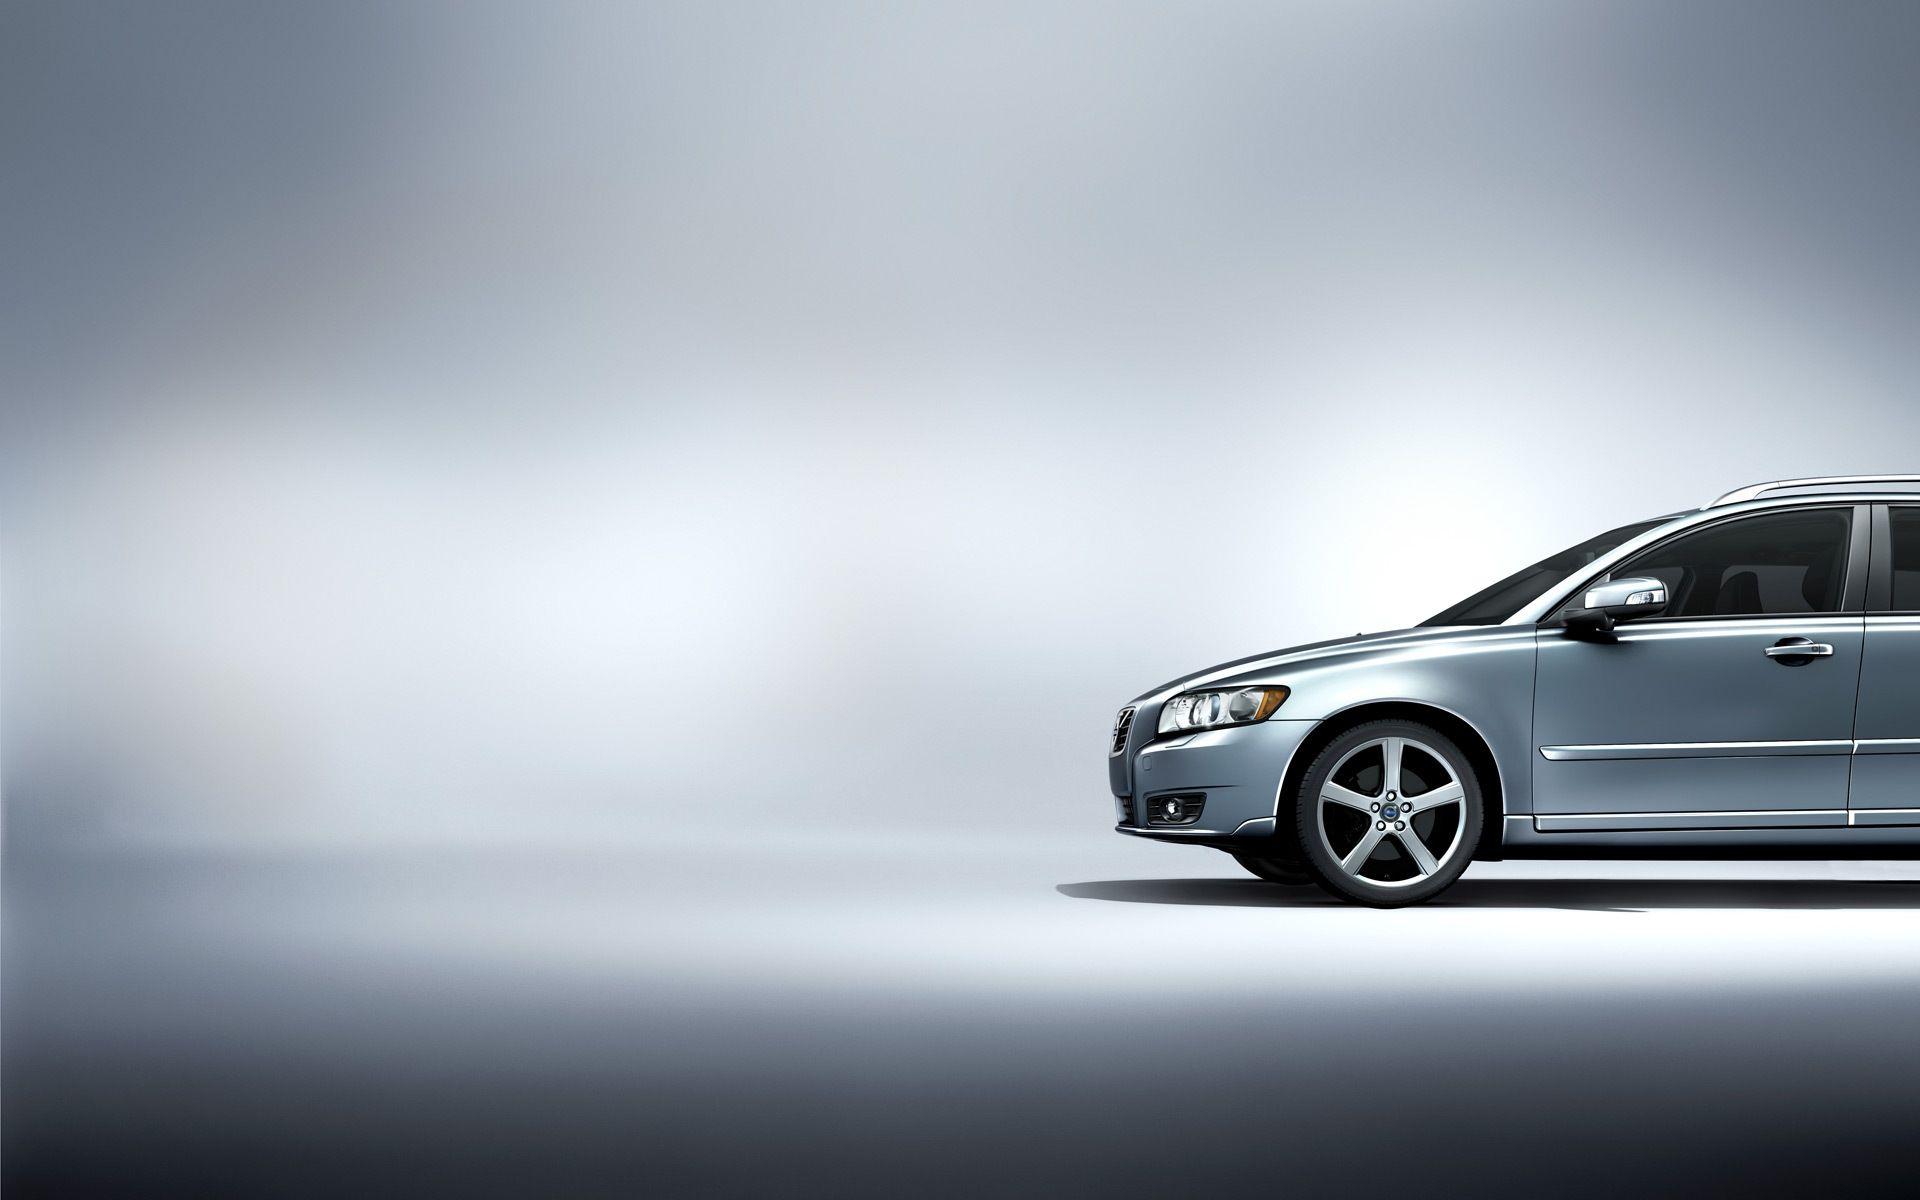 Wallpaper Car Background HD Pulse On Cars Image For Mobile Grey